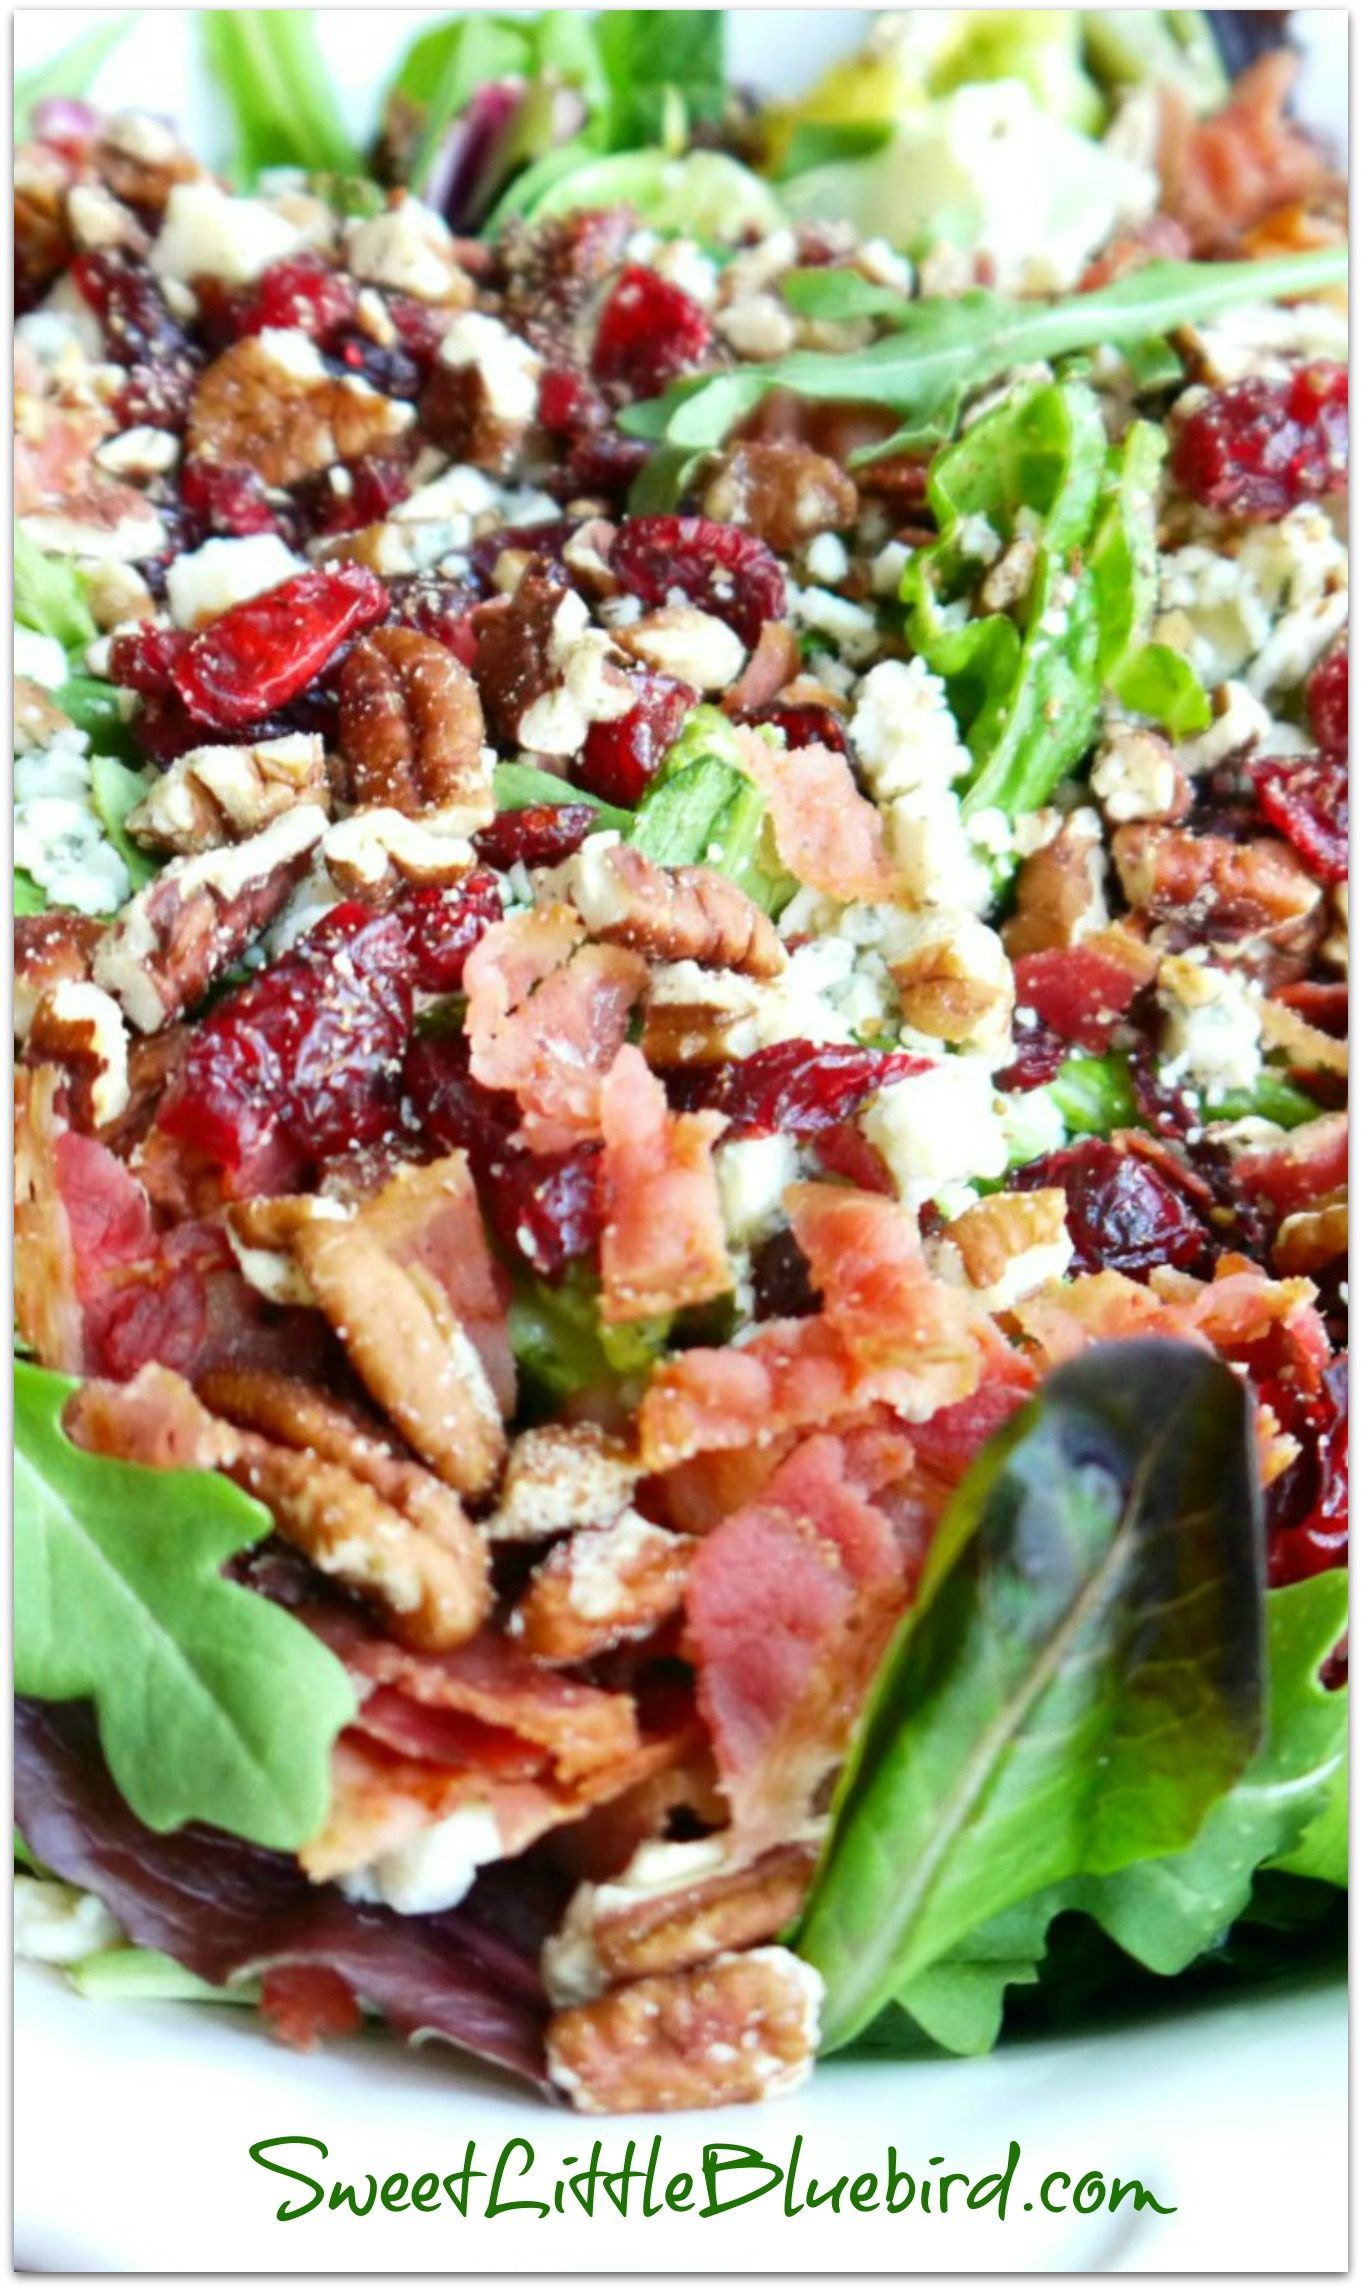 POPULAR PIN! MY #1 MOST REQUESTED SALAD {Made with Gorgonzola, Apple, Dried Cherri